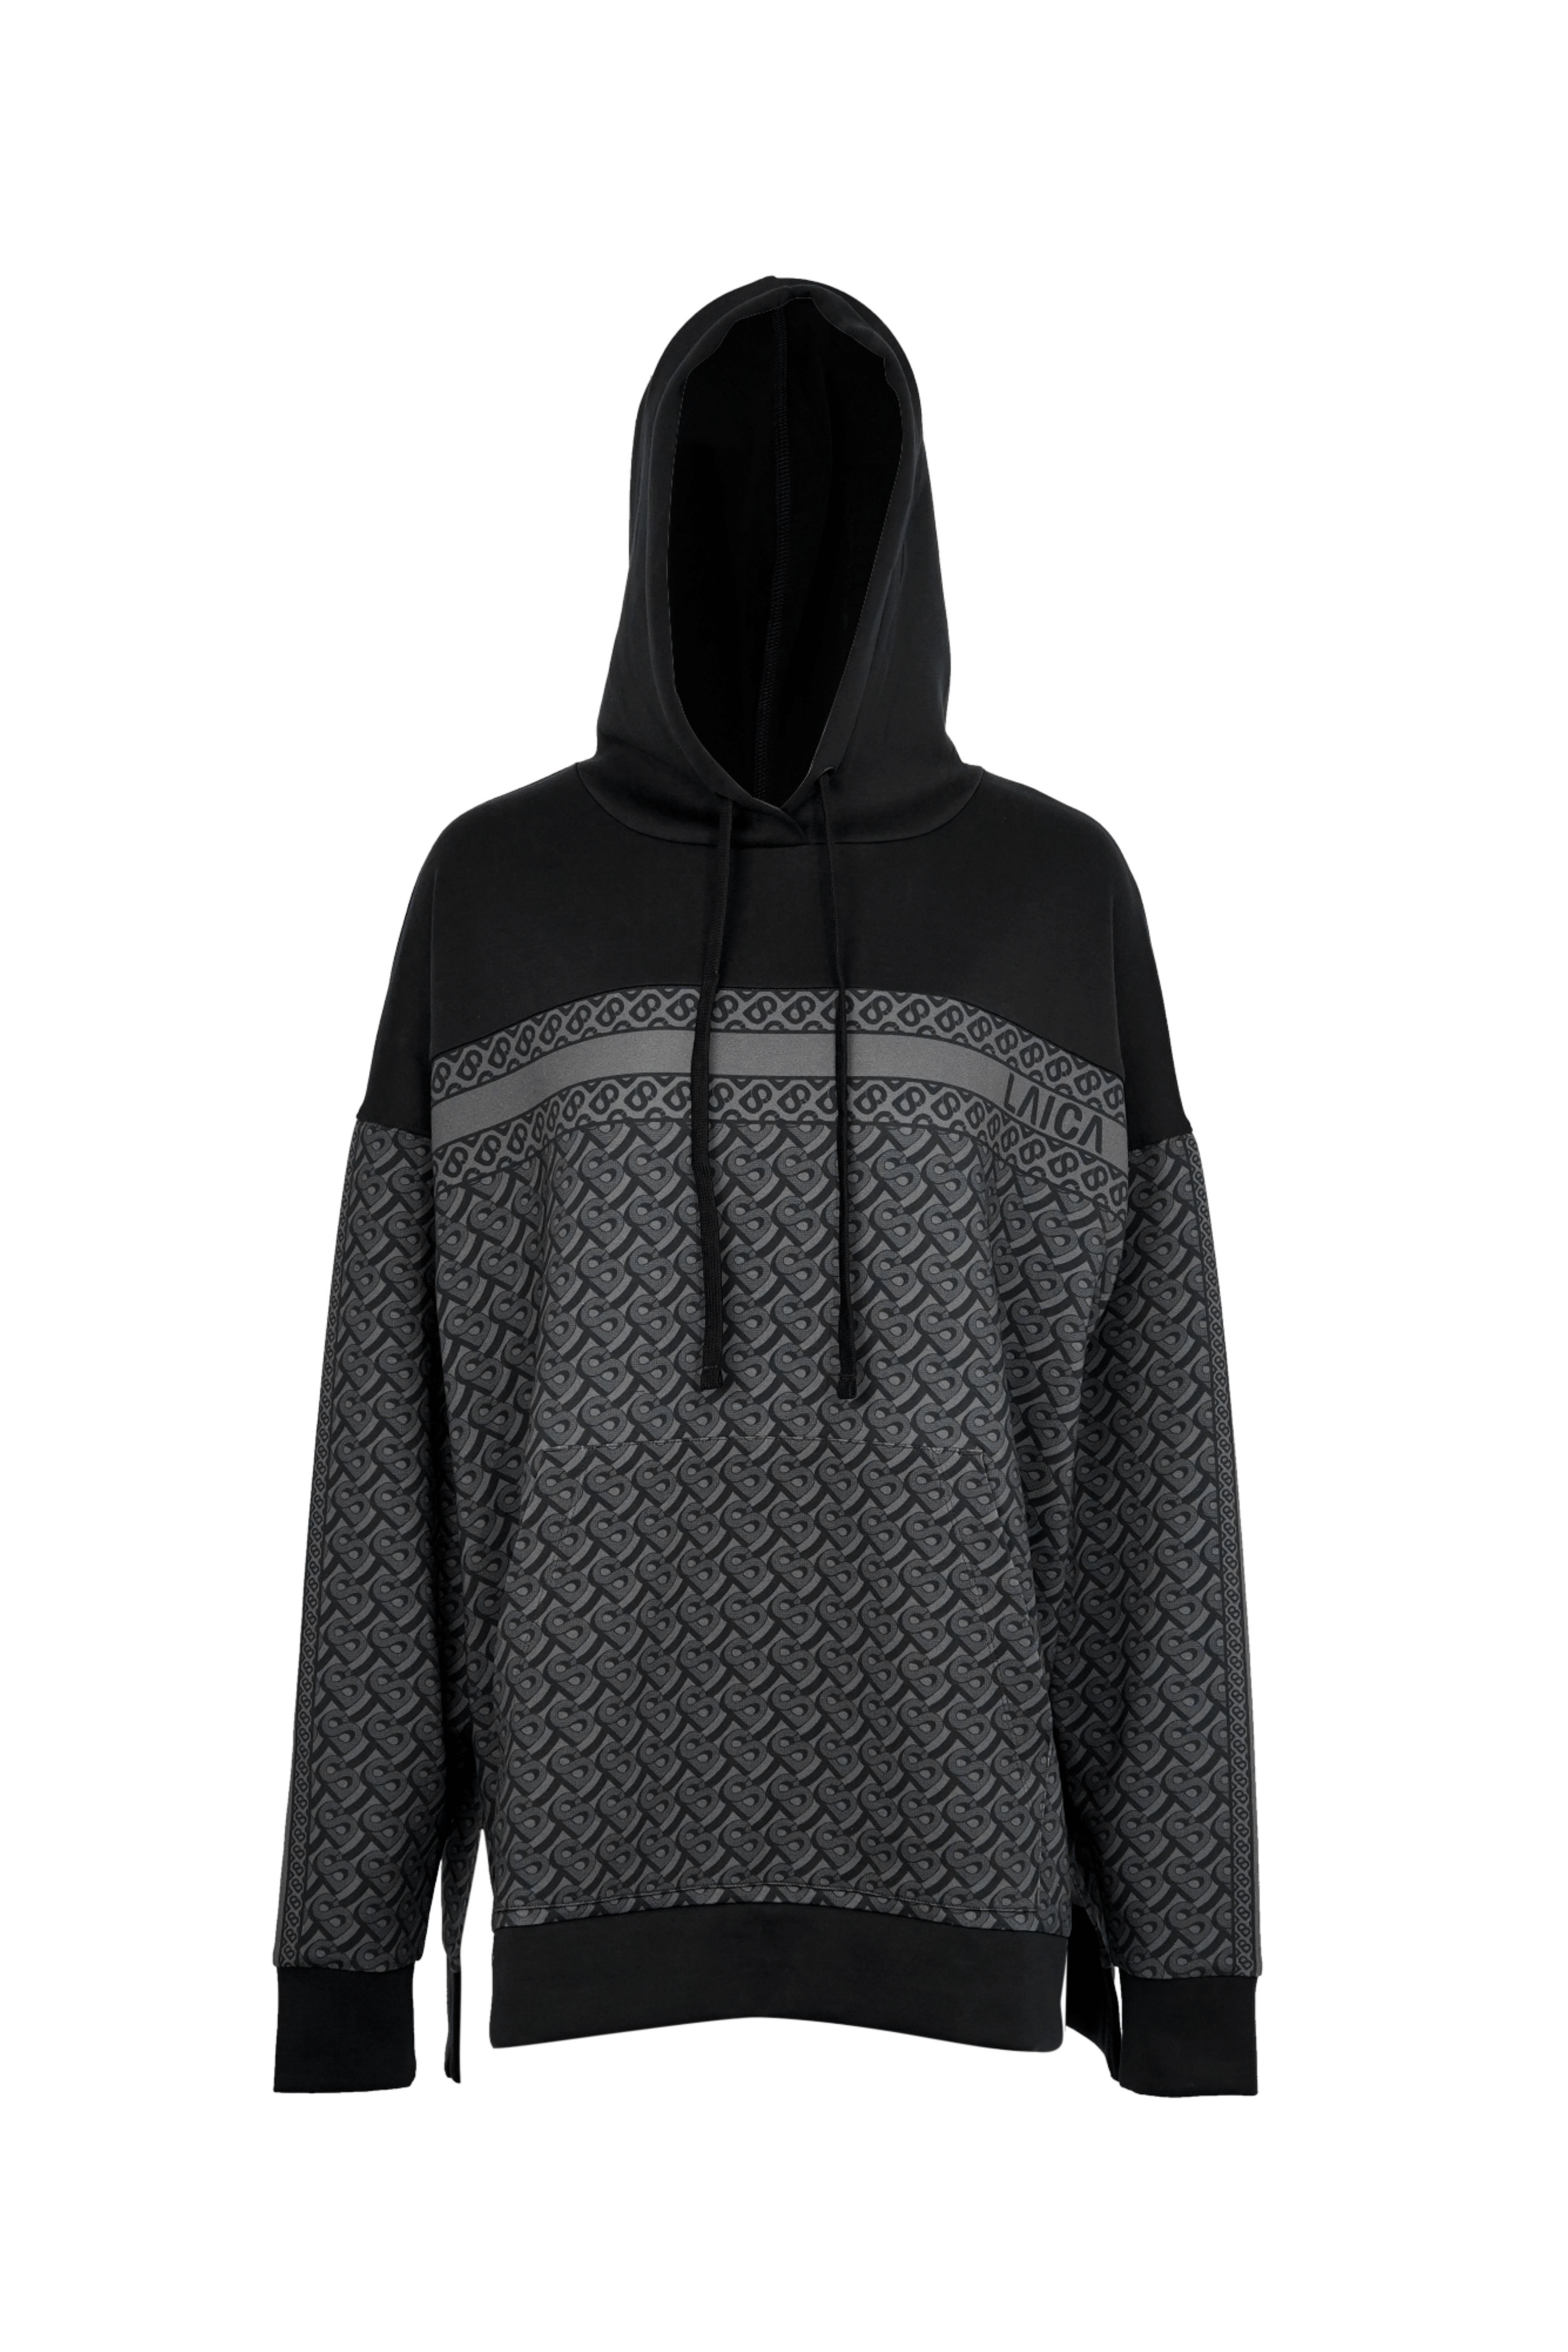 LAICA x Buttonscarves Athleisure Hoodie - Black